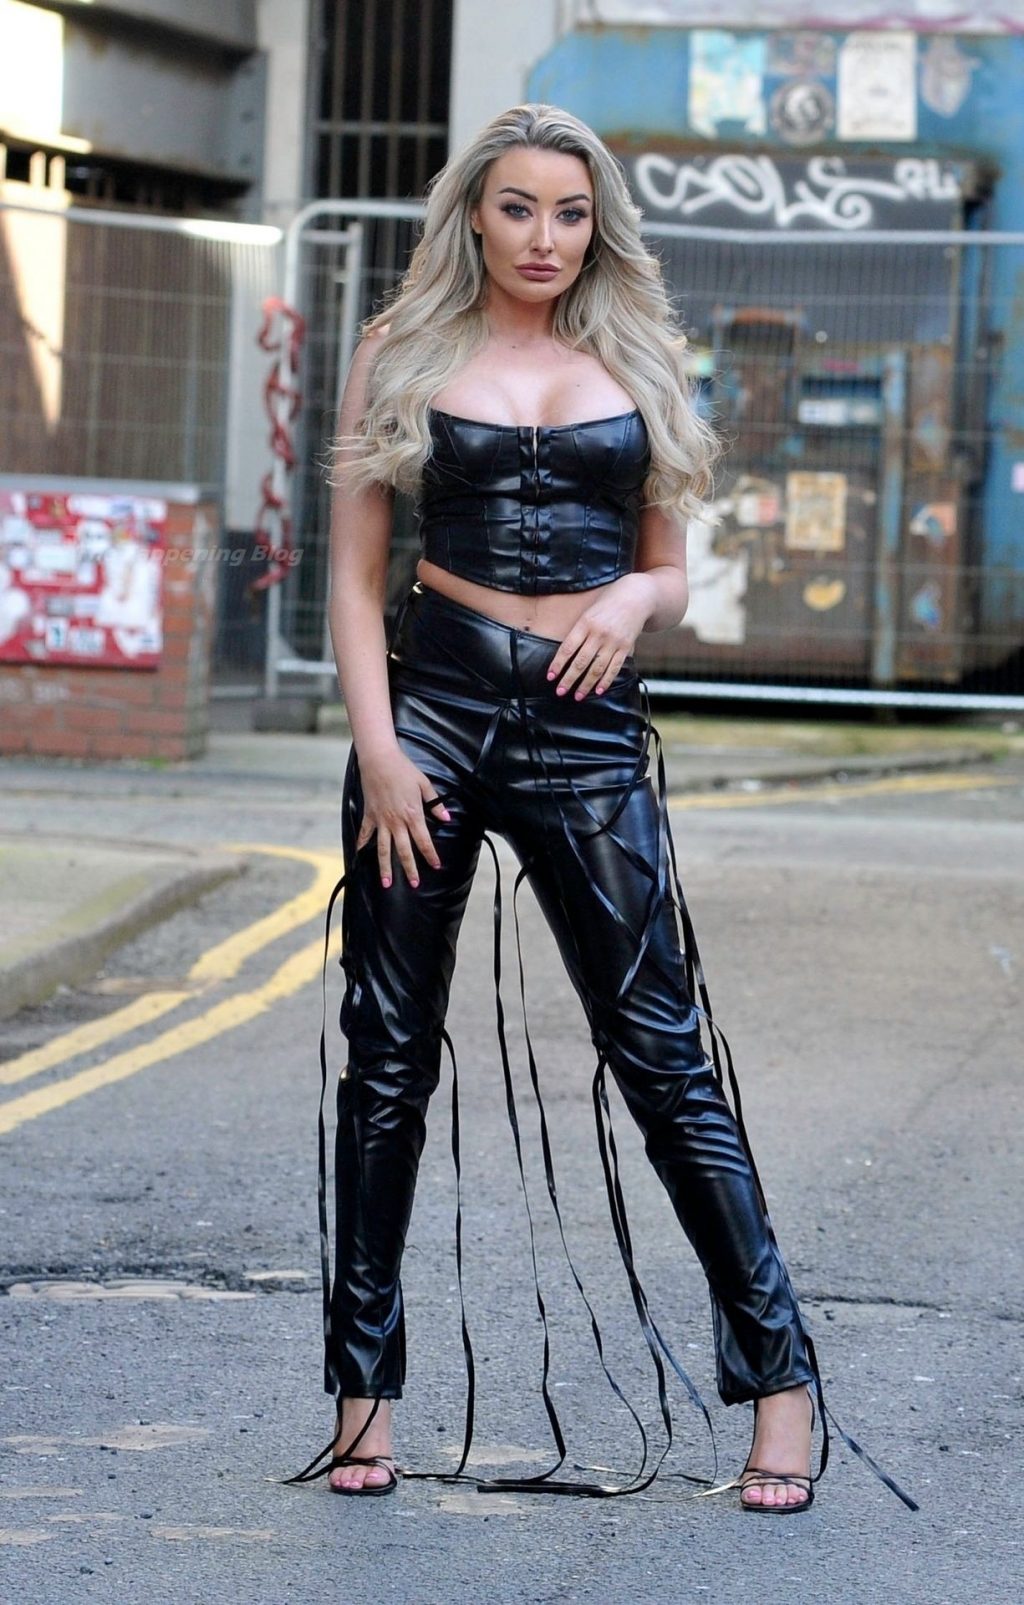 Chloe Crowhurst Puts on Very Busty Display in Manchester (12 Photos)